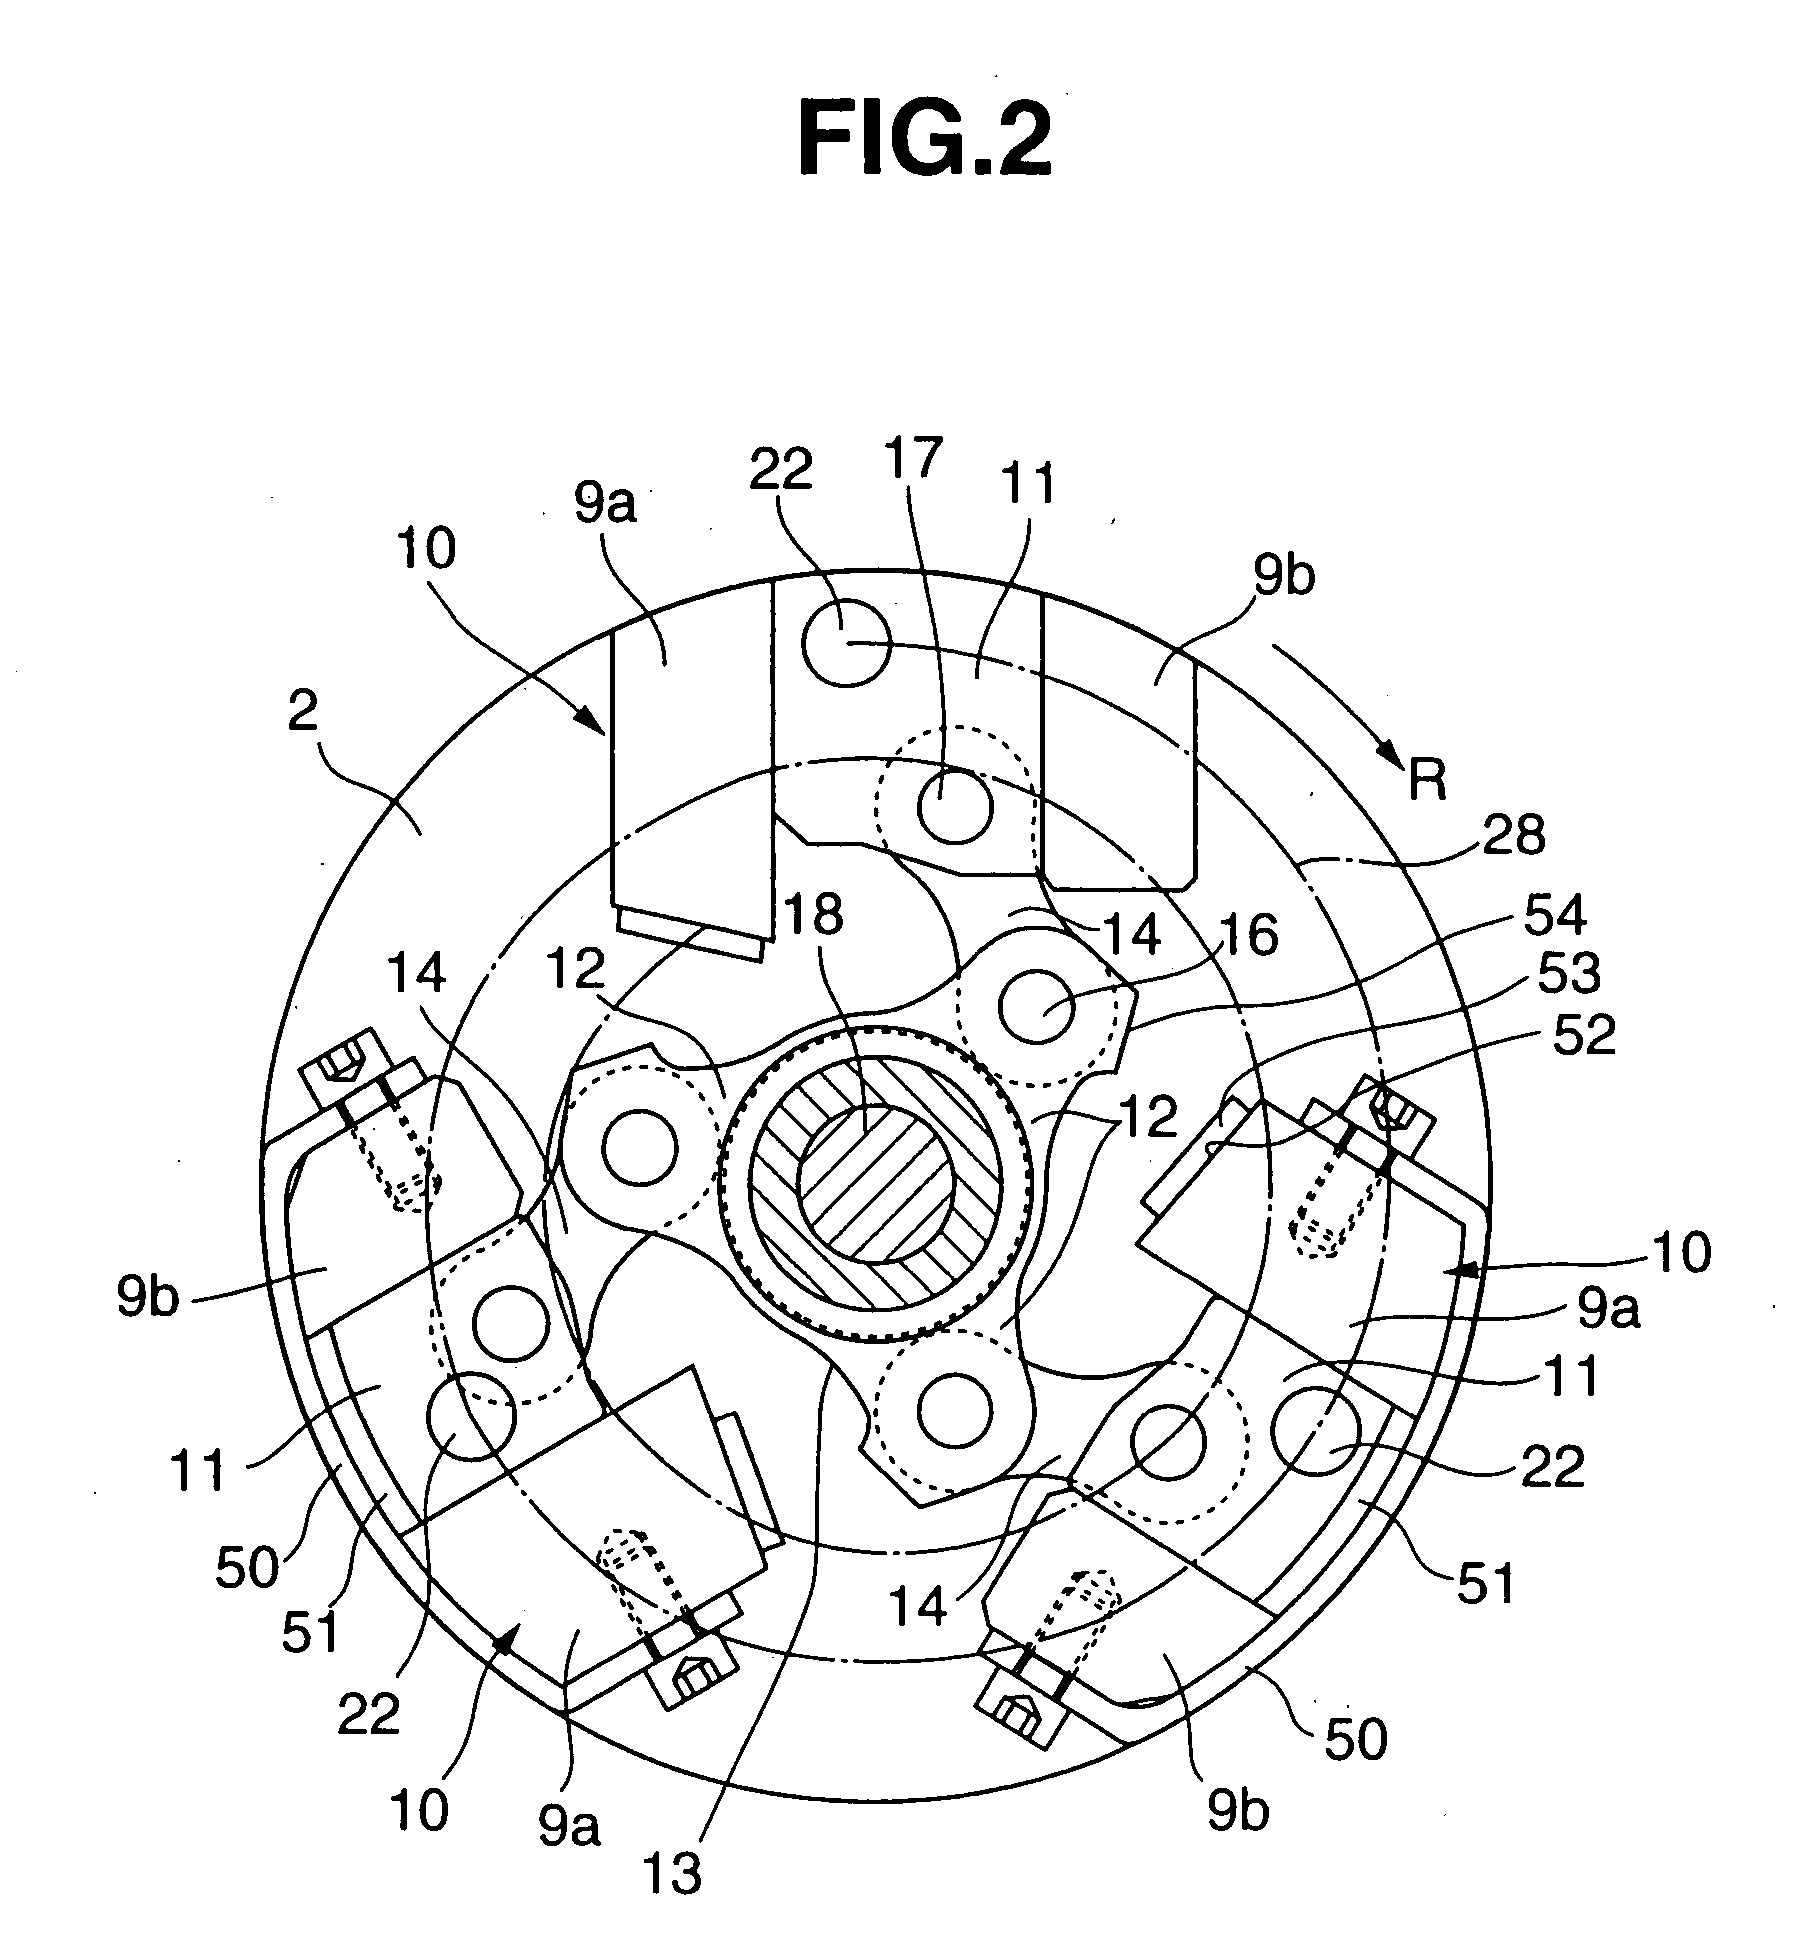 Valve timing control device for internal combustion engine